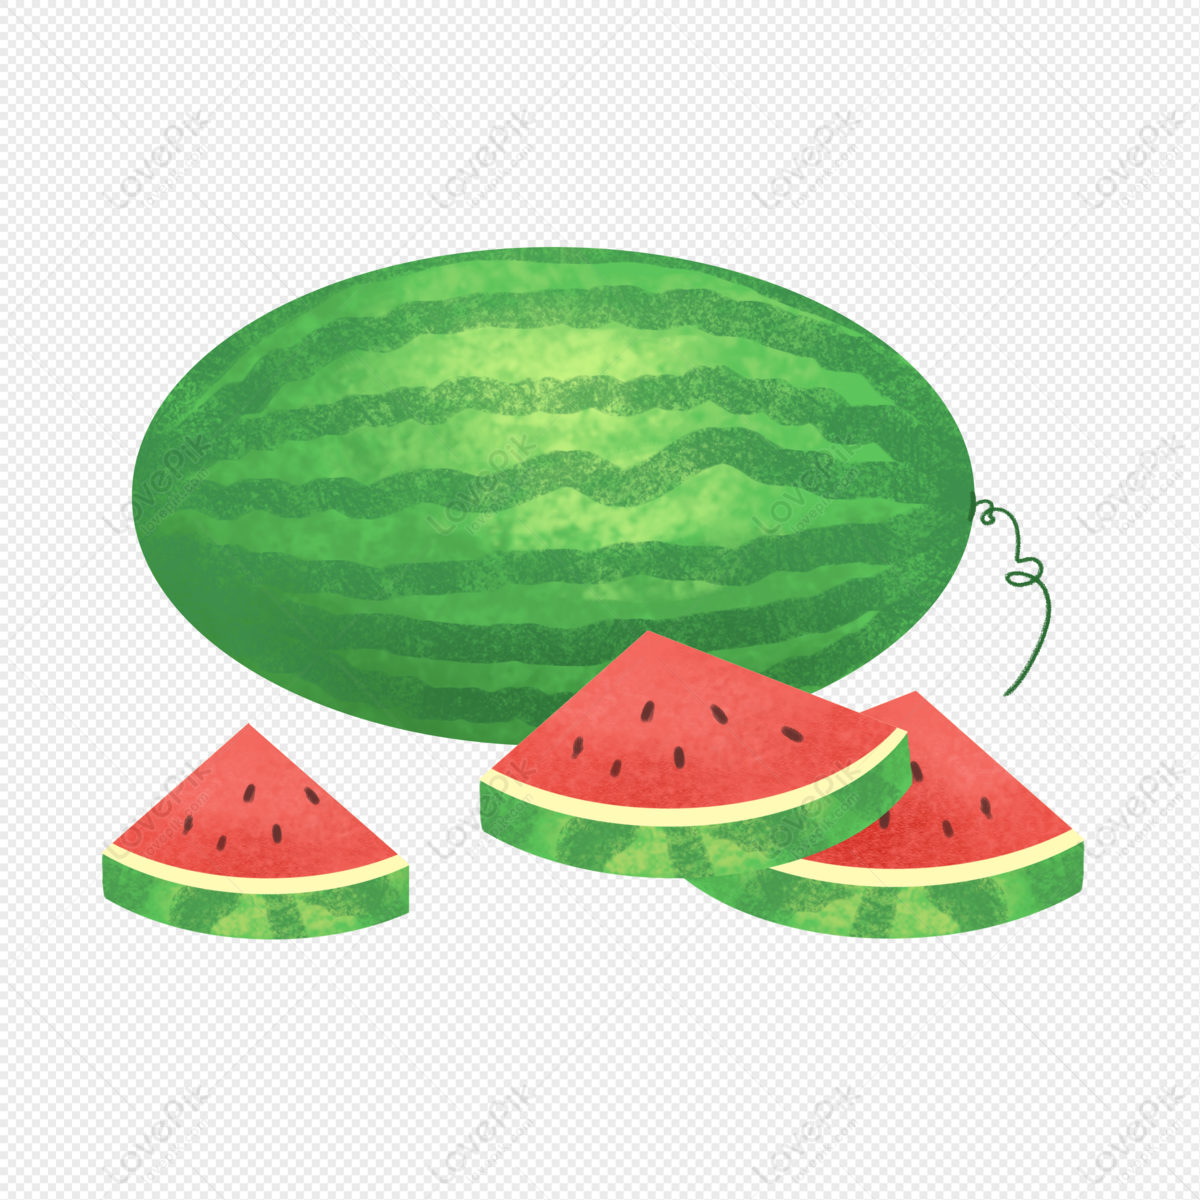 How To Draw A Watermelon | Colored Pencil Tutorial (Very Easy) - YouTube